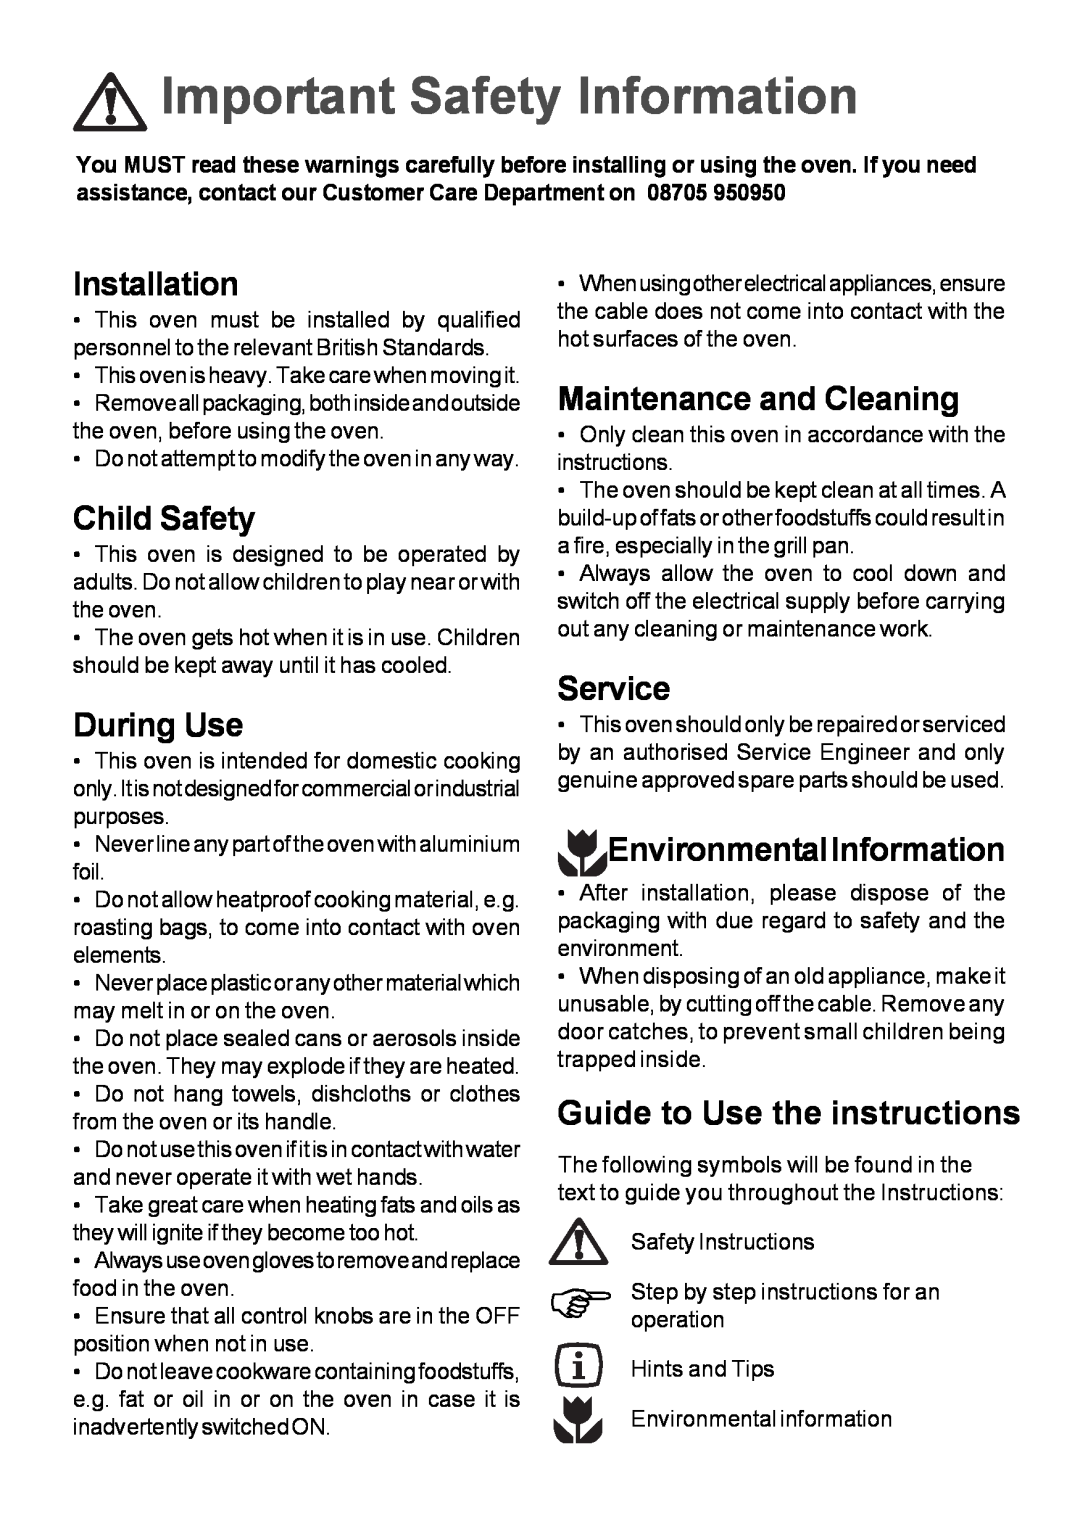 Moffat MSF 615 Important Safety Information, Installation, Child Safety, During Use, Maintenance and Cleaning, Service 